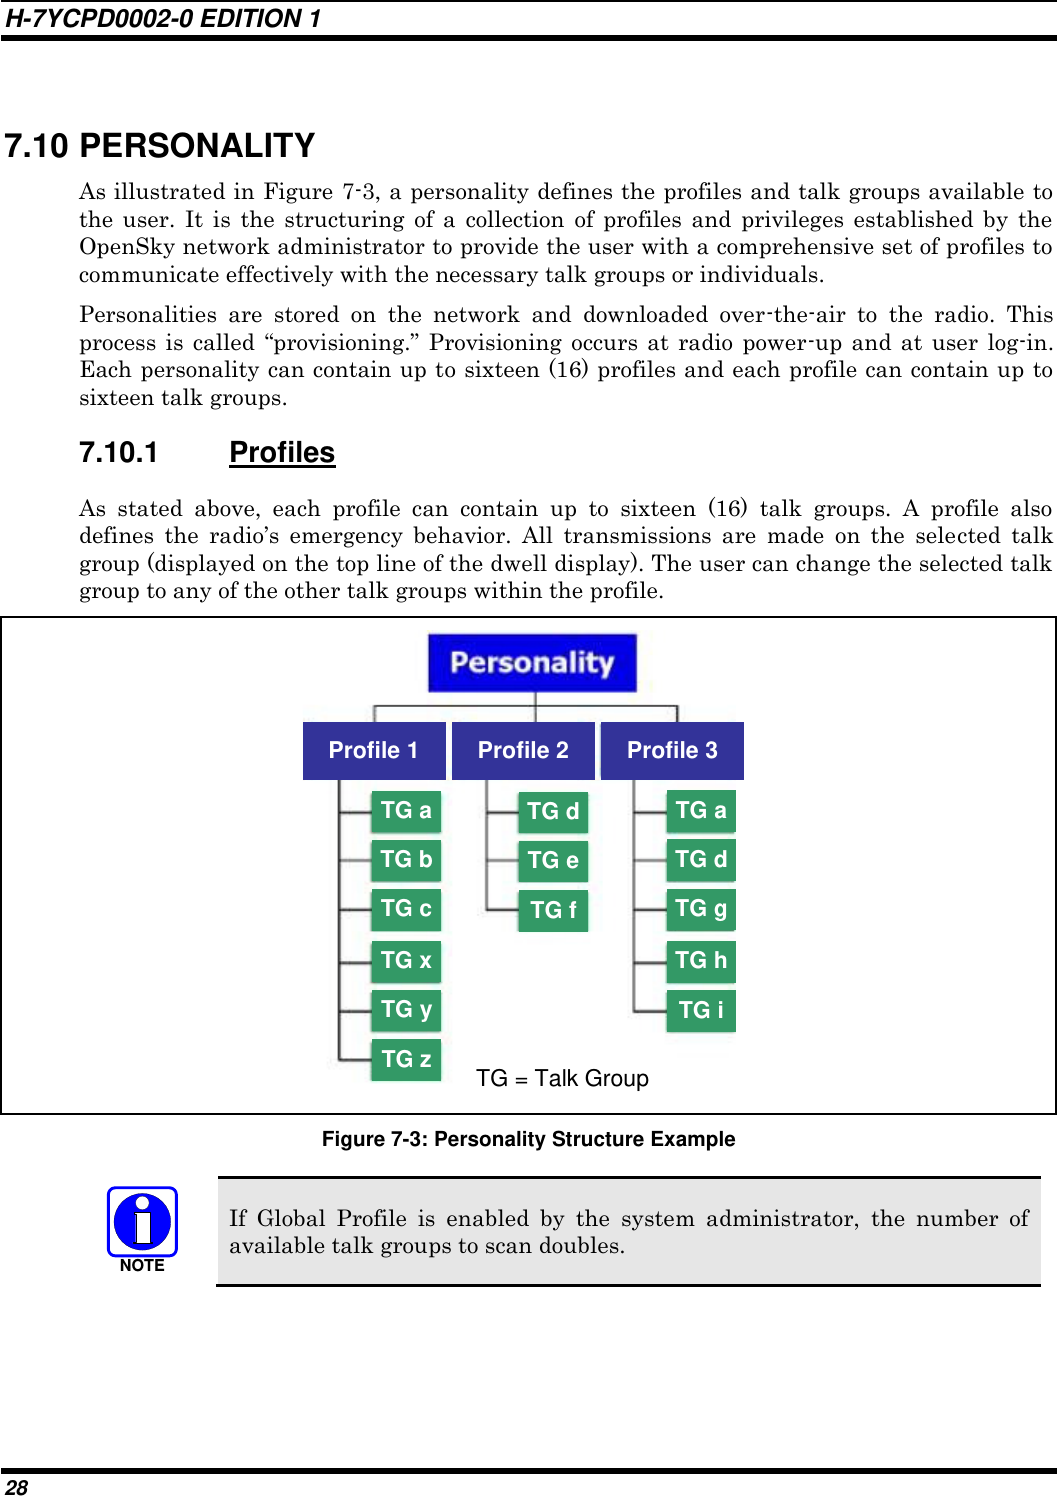 H-7YCPD0002-0 EDITION 1 28  7.10 PERSONALITY As illustrated in Figure 7-3, a personality defines the profiles and talk groups available to the  user.  It  is  the  structuring  of  a  collection  of  profiles  and  privileges  established  by  the OpenSky network administrator to provide the user with a comprehensive set of profiles to communicate effectively with the necessary talk groups or individuals. Personalities  are  stored  on  the  network  and  downloaded  over-the-air  to  the  radio.  This process  is  called “provisioning.”  Provisioning  occurs at  radio  power-up  and at  user log-in. Each personality can contain up to sixteen (16) profiles and each profile can contain up to sixteen talk groups. 7.10.1  Profiles As  stated  above,  each  profile  can  contain  up  to  sixteen  (16)  talk  groups.  A  profile  also defines  the  radio‟s  emergency  behavior.  All  transmissions  are  made  on  the  selected  talk group (displayed on the top line of the dwell display). The user can change the selected talk group to any of the other talk groups within the profile.  TG a TG b TG c TG x TG y TG z TG d TG e TG f TG a TG d TG g TG h TG i TG = Talk Group Profile 1 Profile 2 Profile 3  Figure 7-3: Personality Structure Example NOTE If  Global  Profile  is  enabled  by  the  system  administrator,  the  number  of available talk groups to scan doubles. 